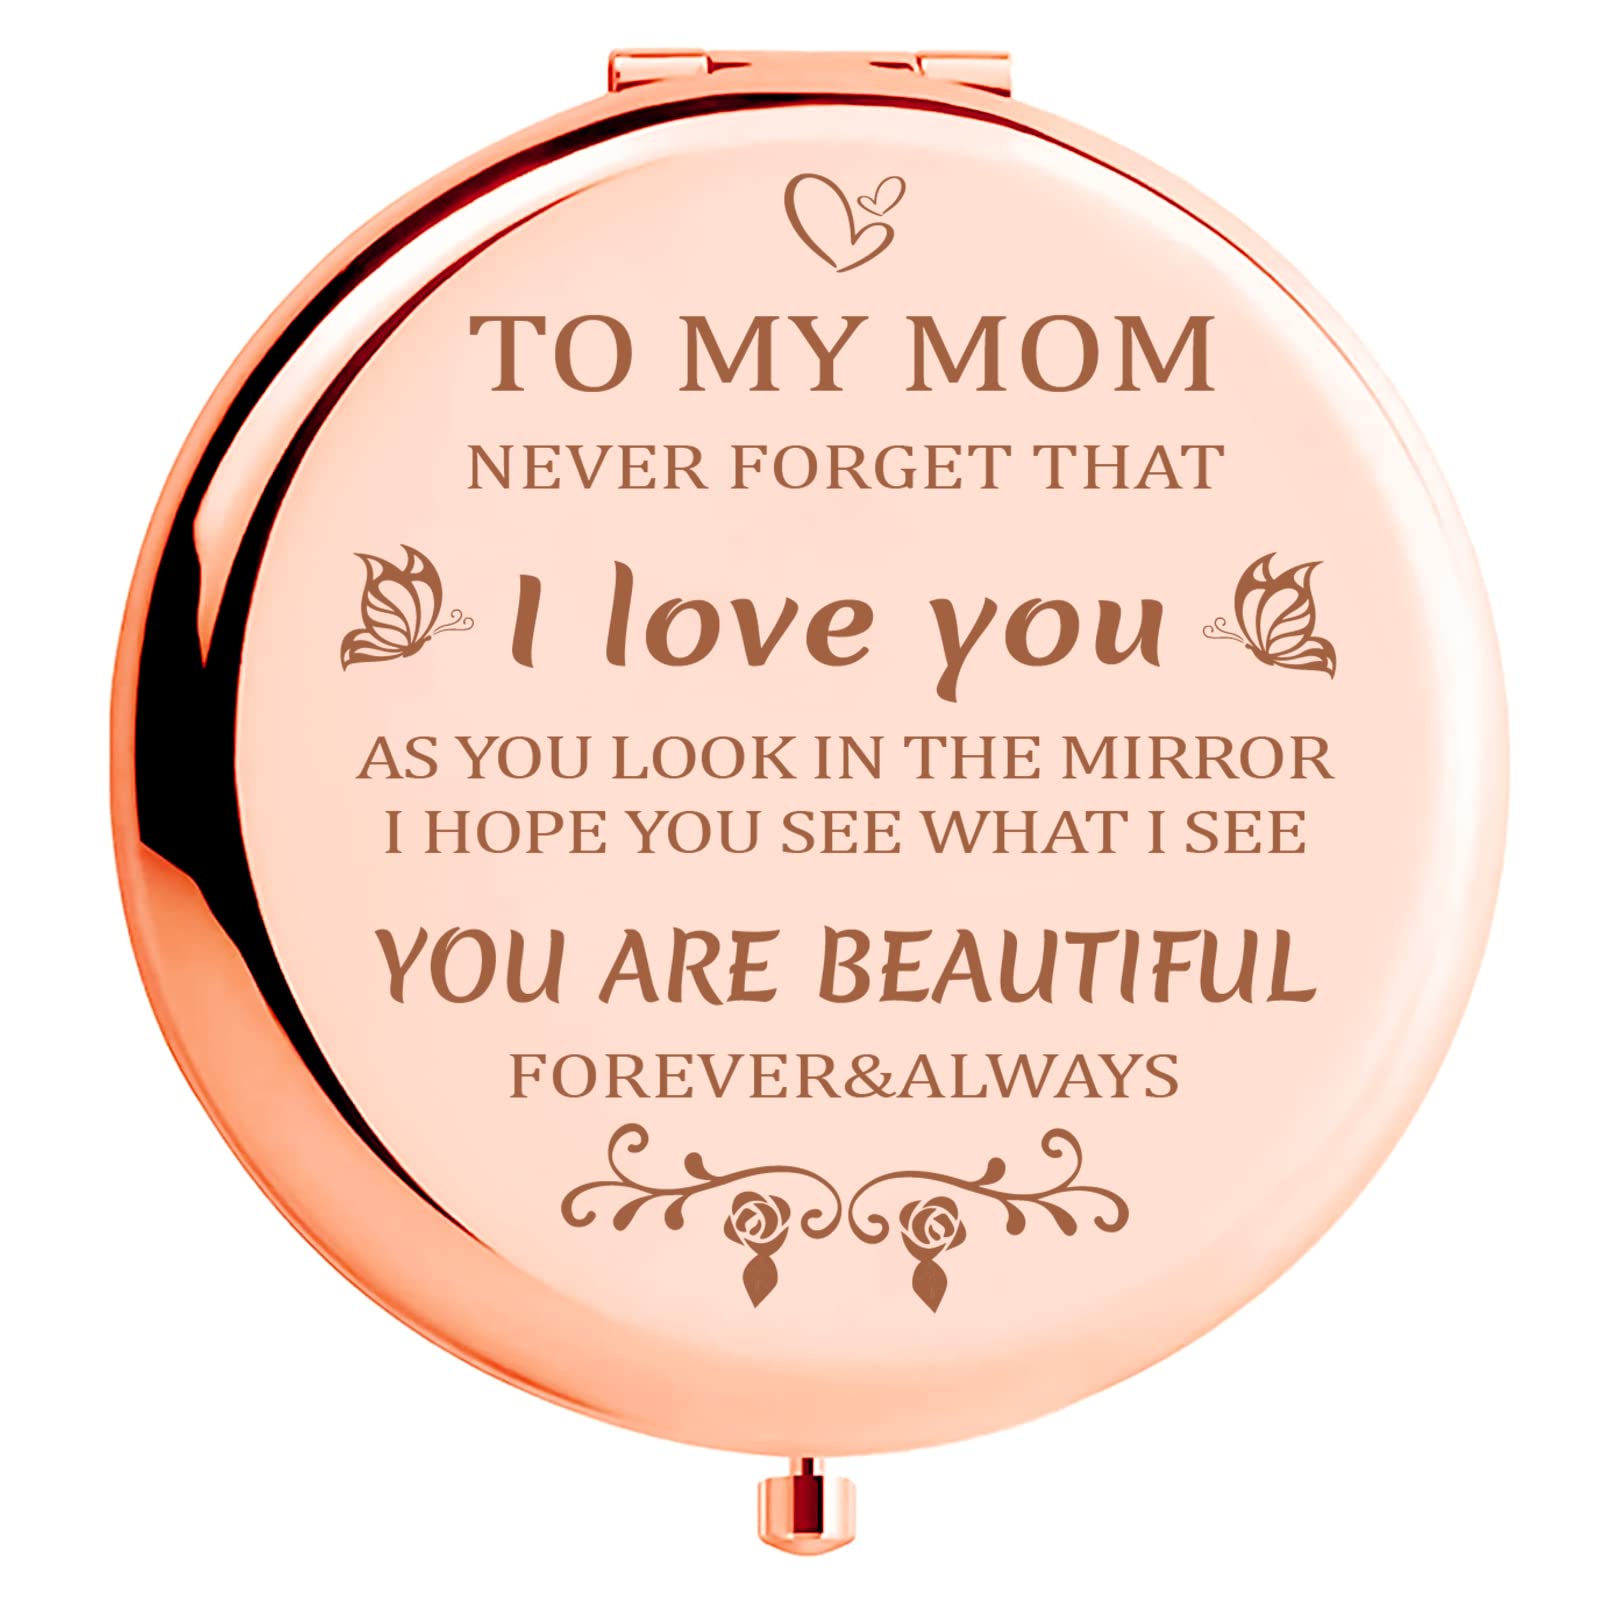 Gifts for Mom from Daughter Son - Mom Birthday Gifts, Birthday  Gifts for Mom, Mother Birthday Gifts - Valentines Day Gifts for Mom, Mom  Valentines Gifts - New Mom Gifts